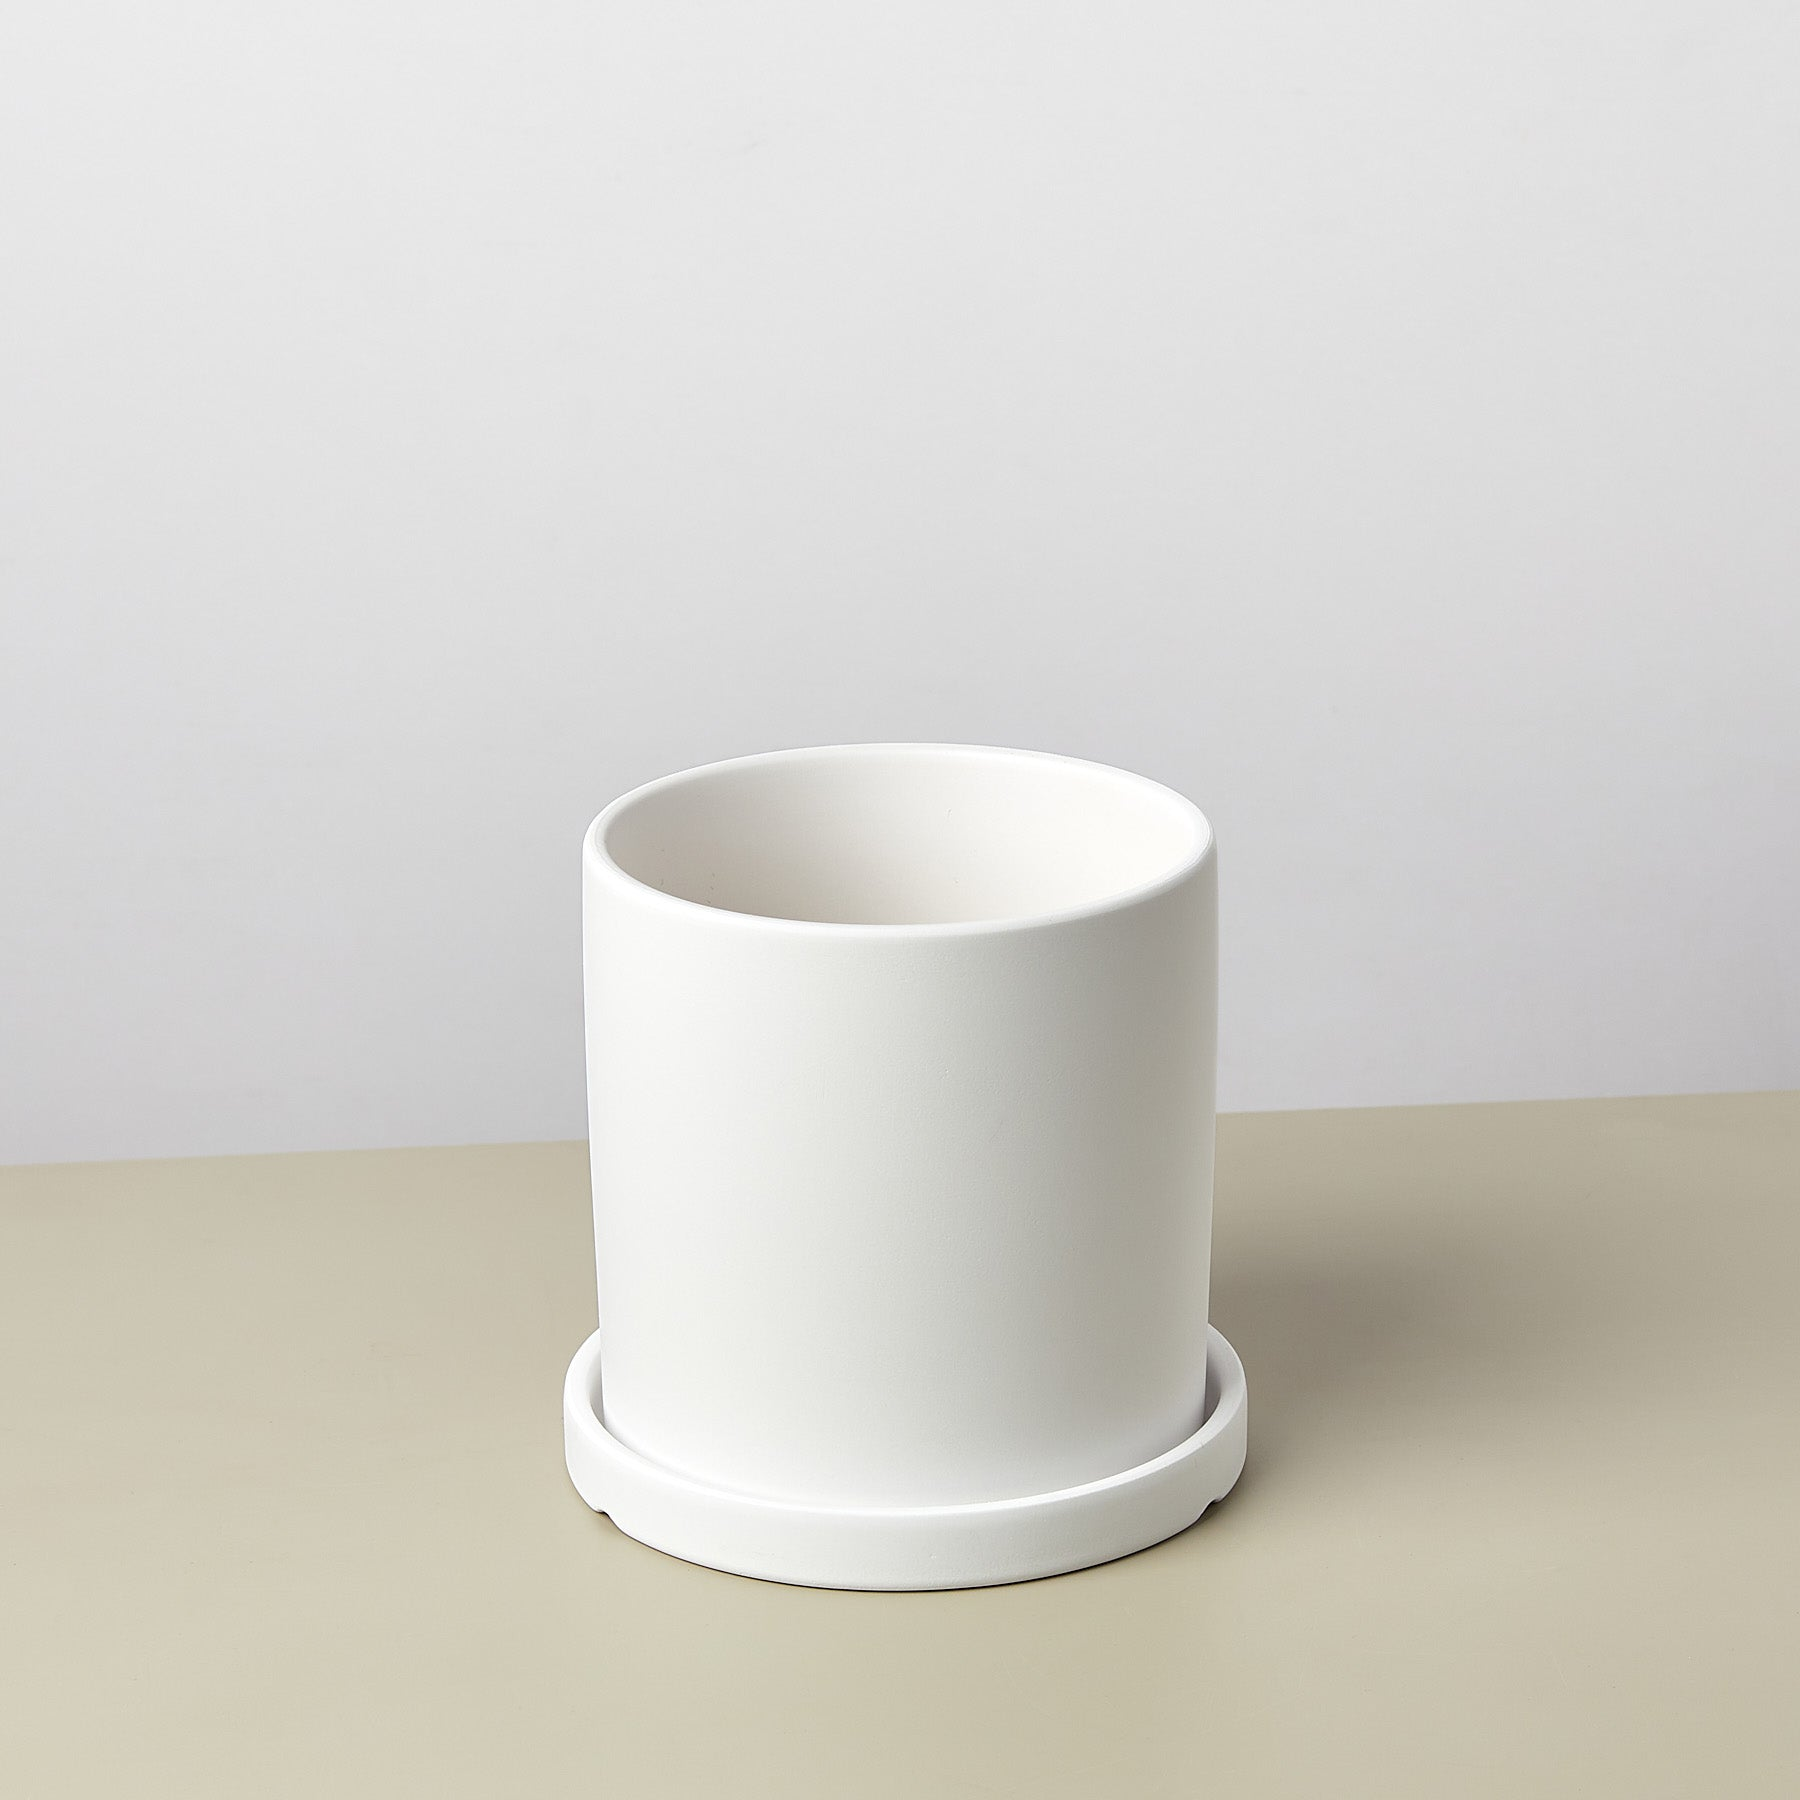 Matte Finish Cylinder Planter with Saucer - Ethereal Company